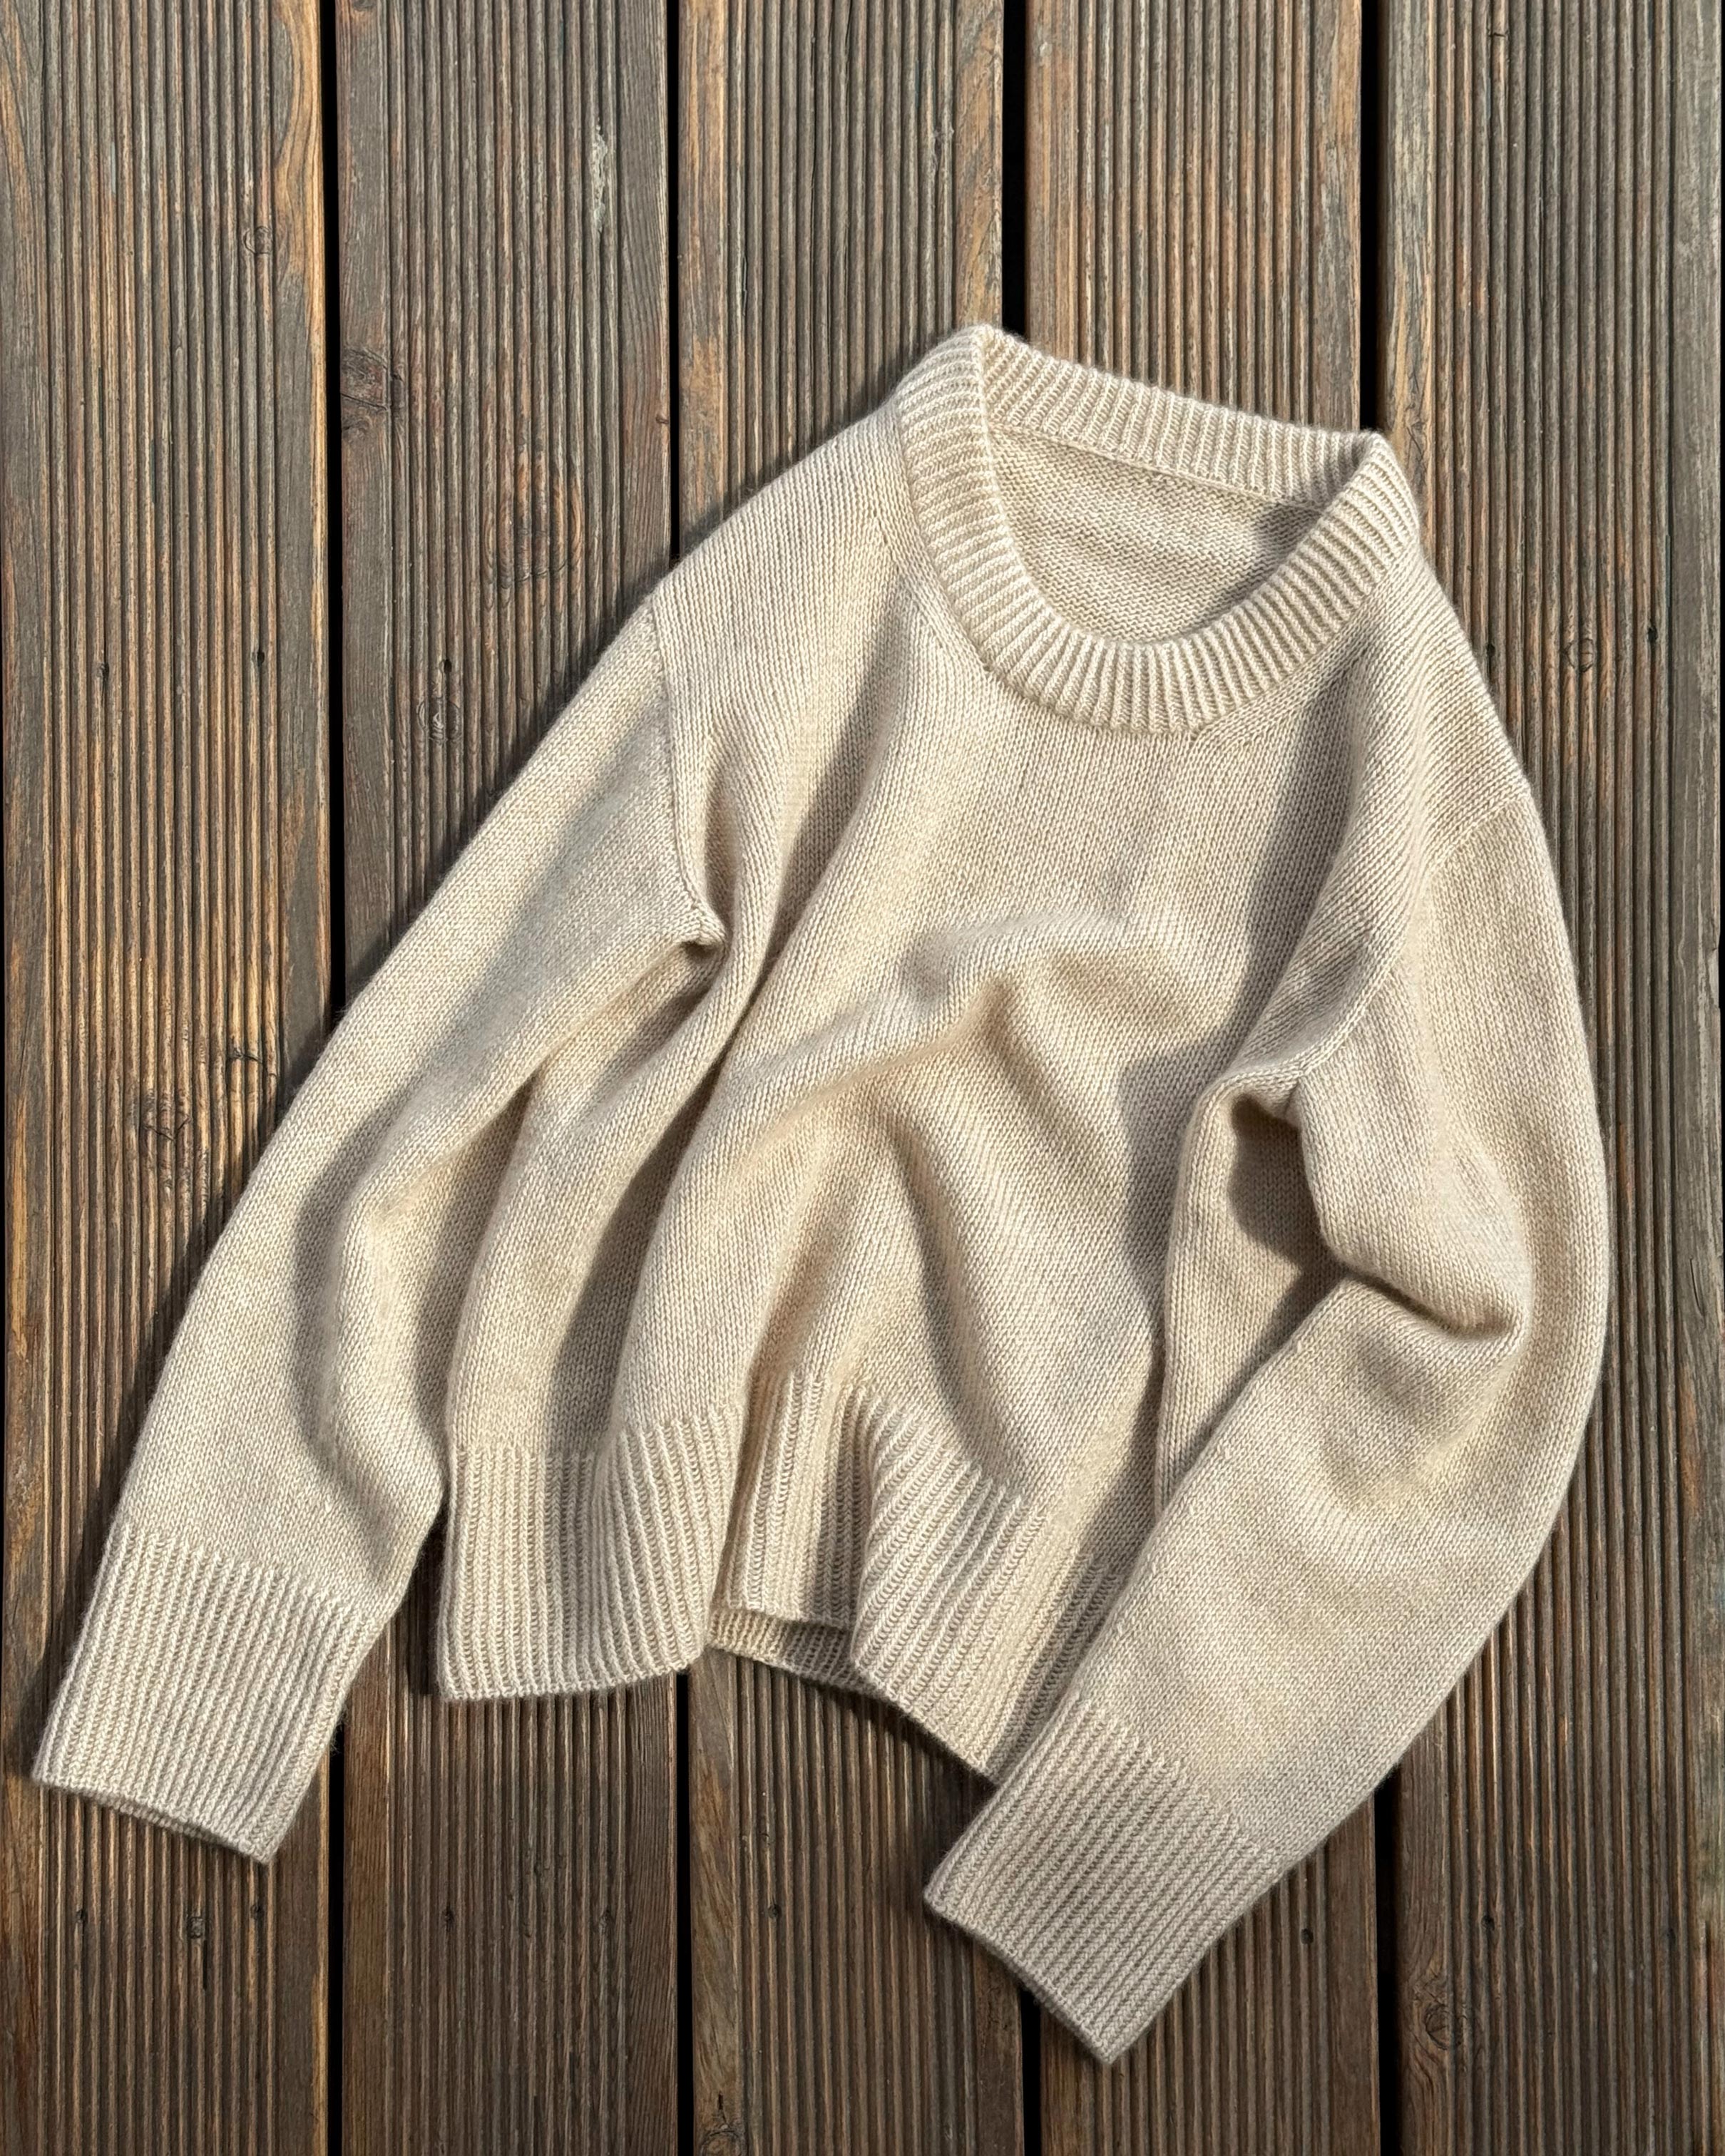 Stockinette stitch Bruno Sweater in light beige, knit guide for a minimalist pullover.